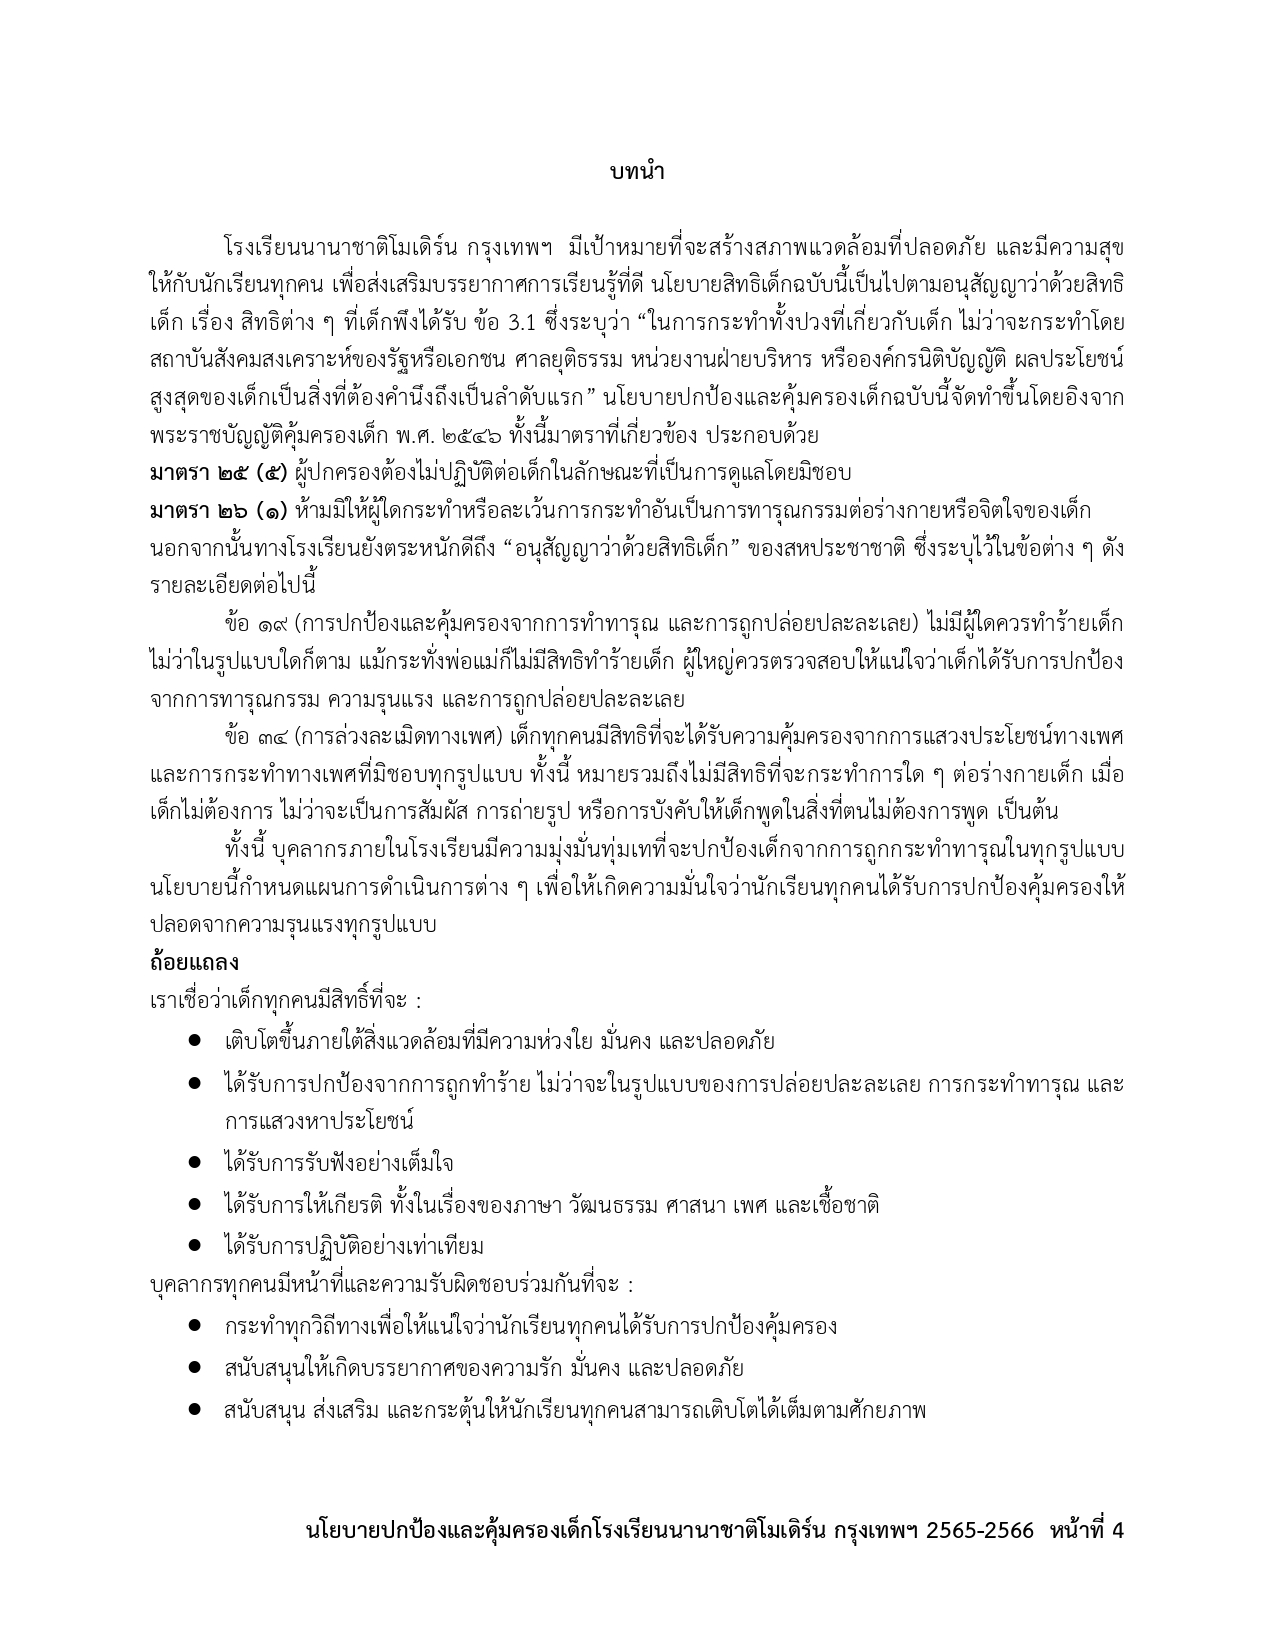 Child Protection Policy Thai Version page 0004